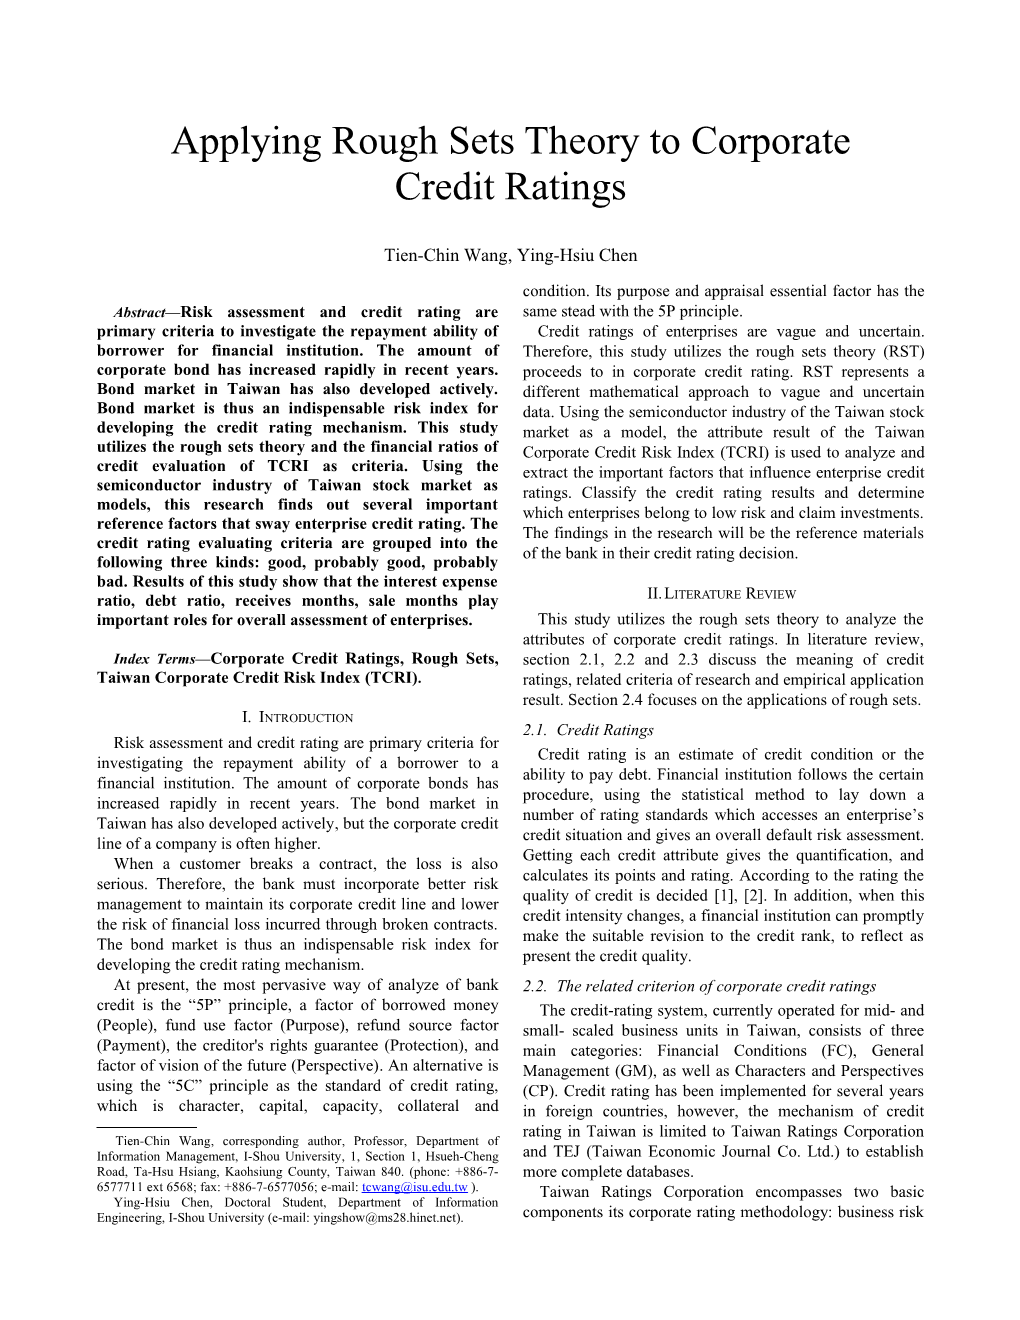 Applying Rough Sets Theory to Corporate Credit Ratings